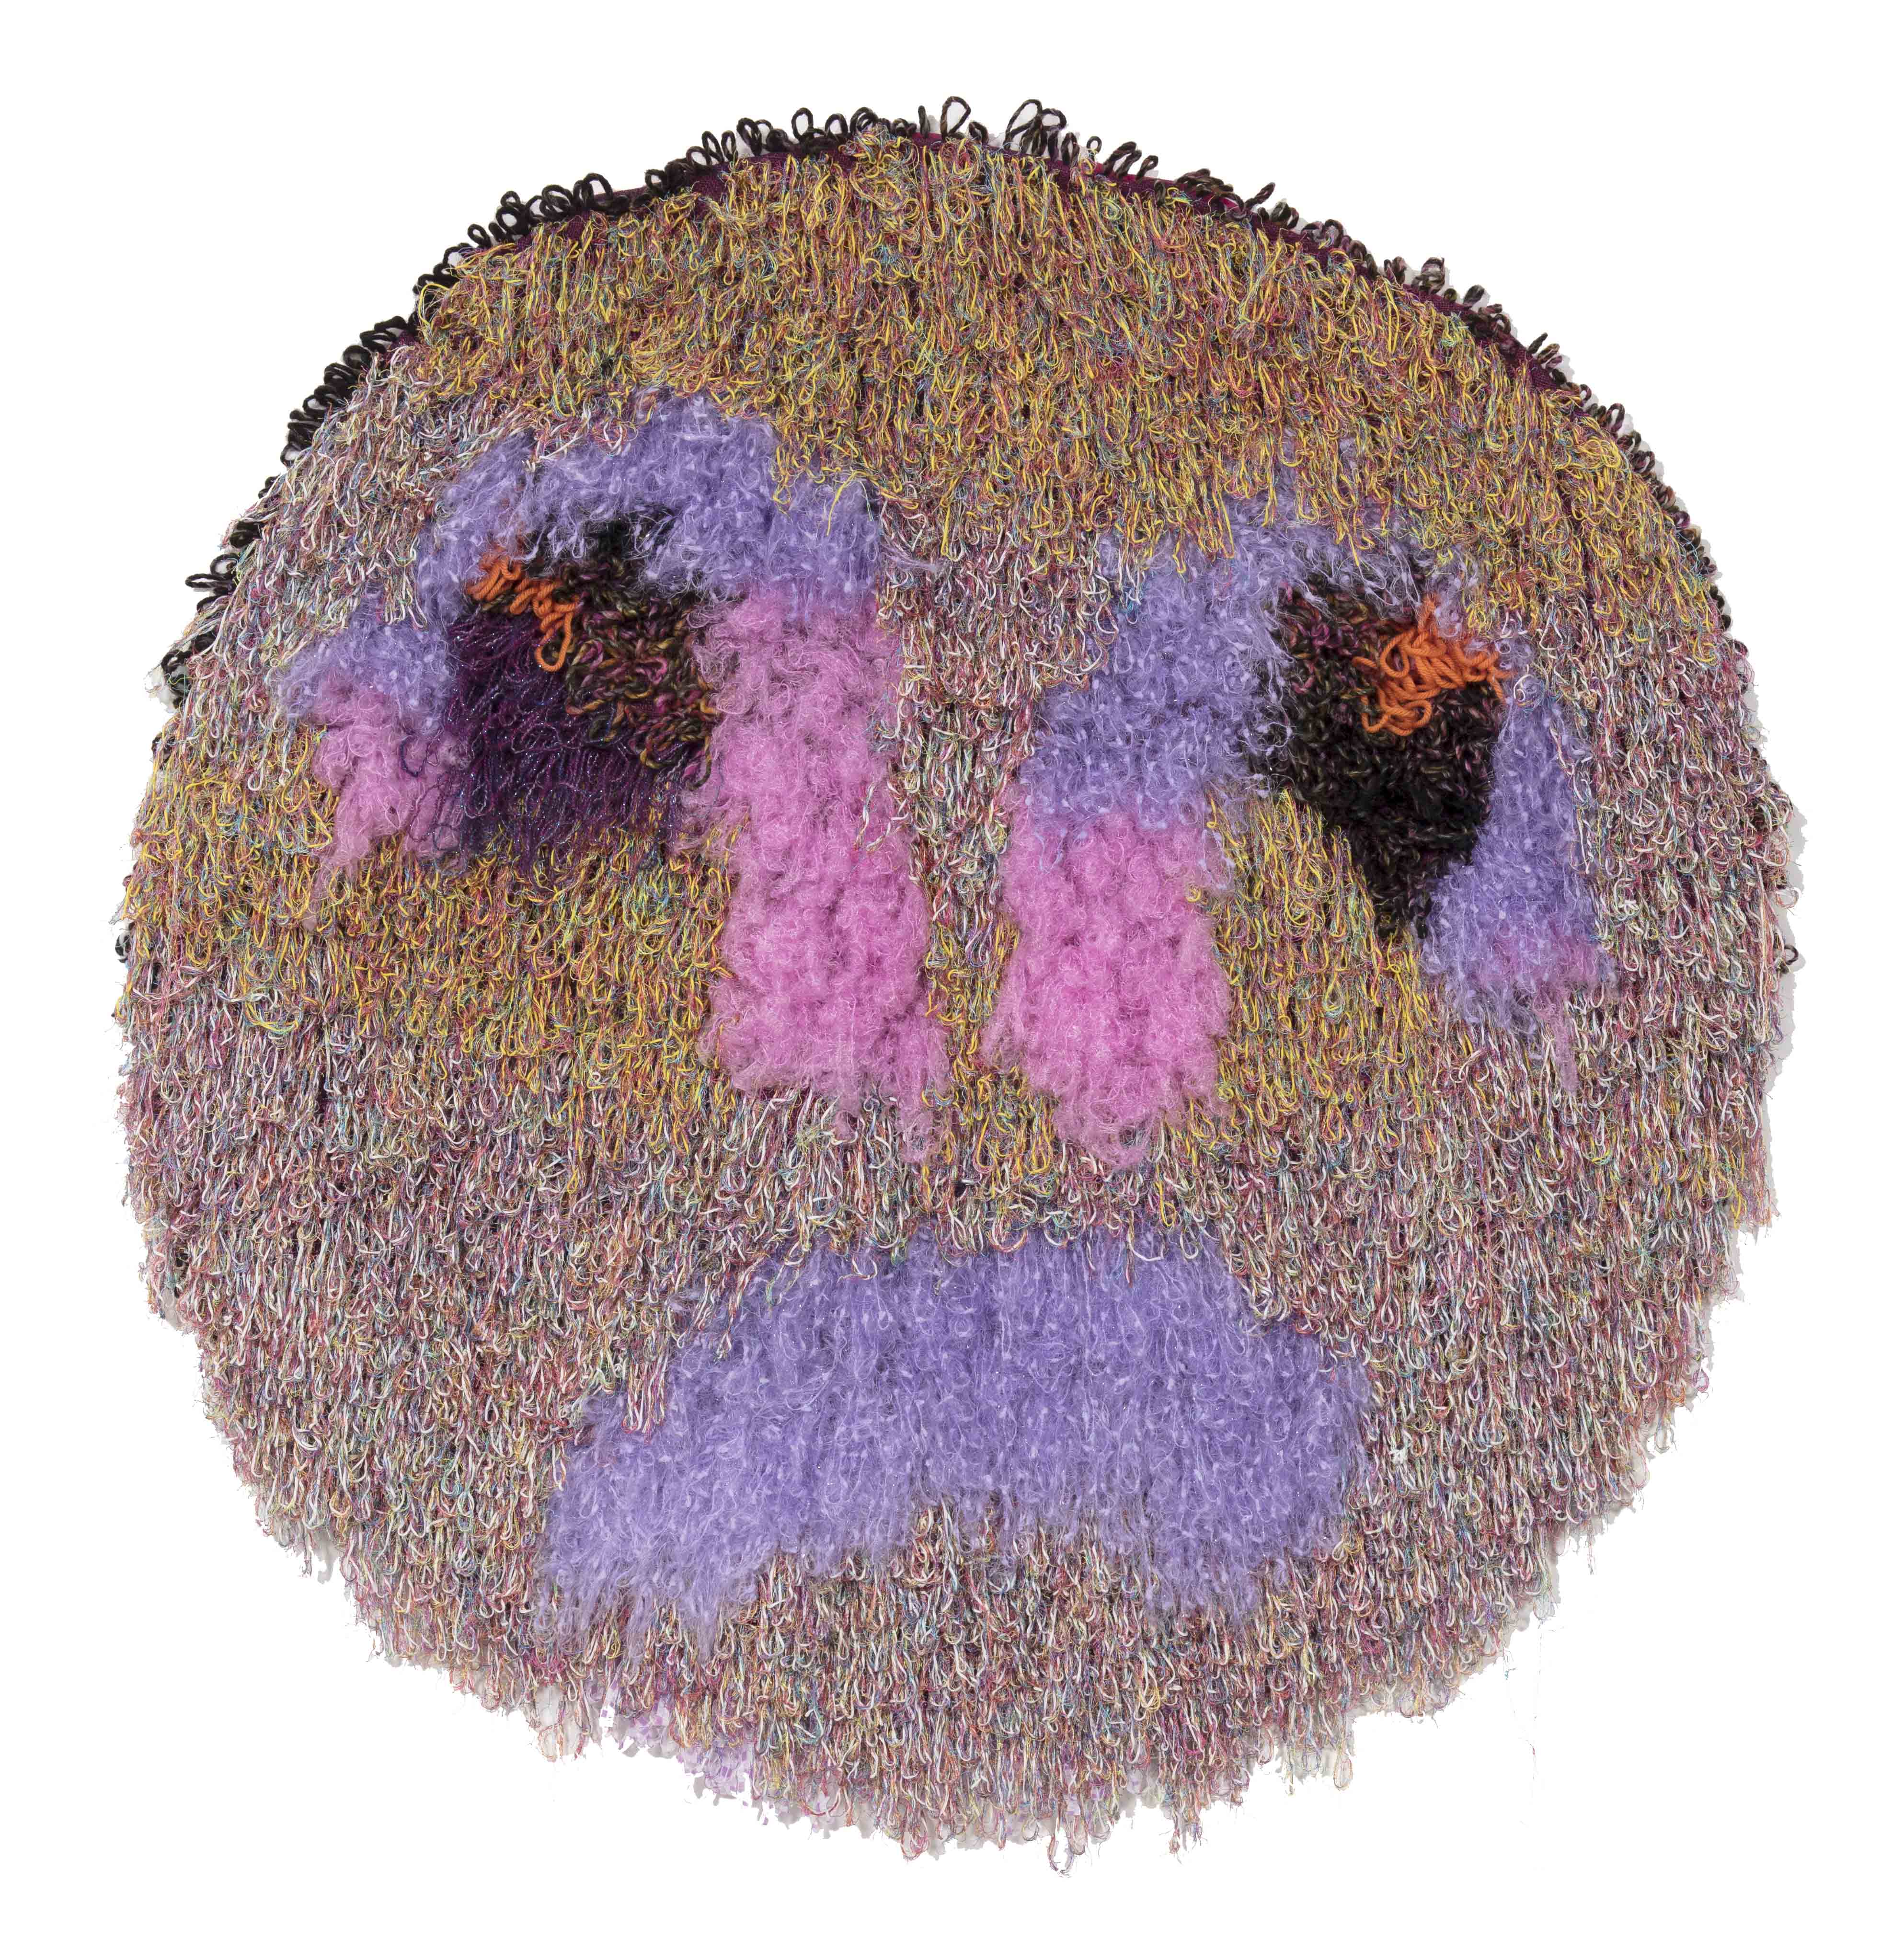 Hannah Epstein. <em>The Saddest Planet in the System</em>, 2018. Wool, acrylic, polyester, nylon and burlap, 46 x 47 inches (116.8 x 119.4 cm)